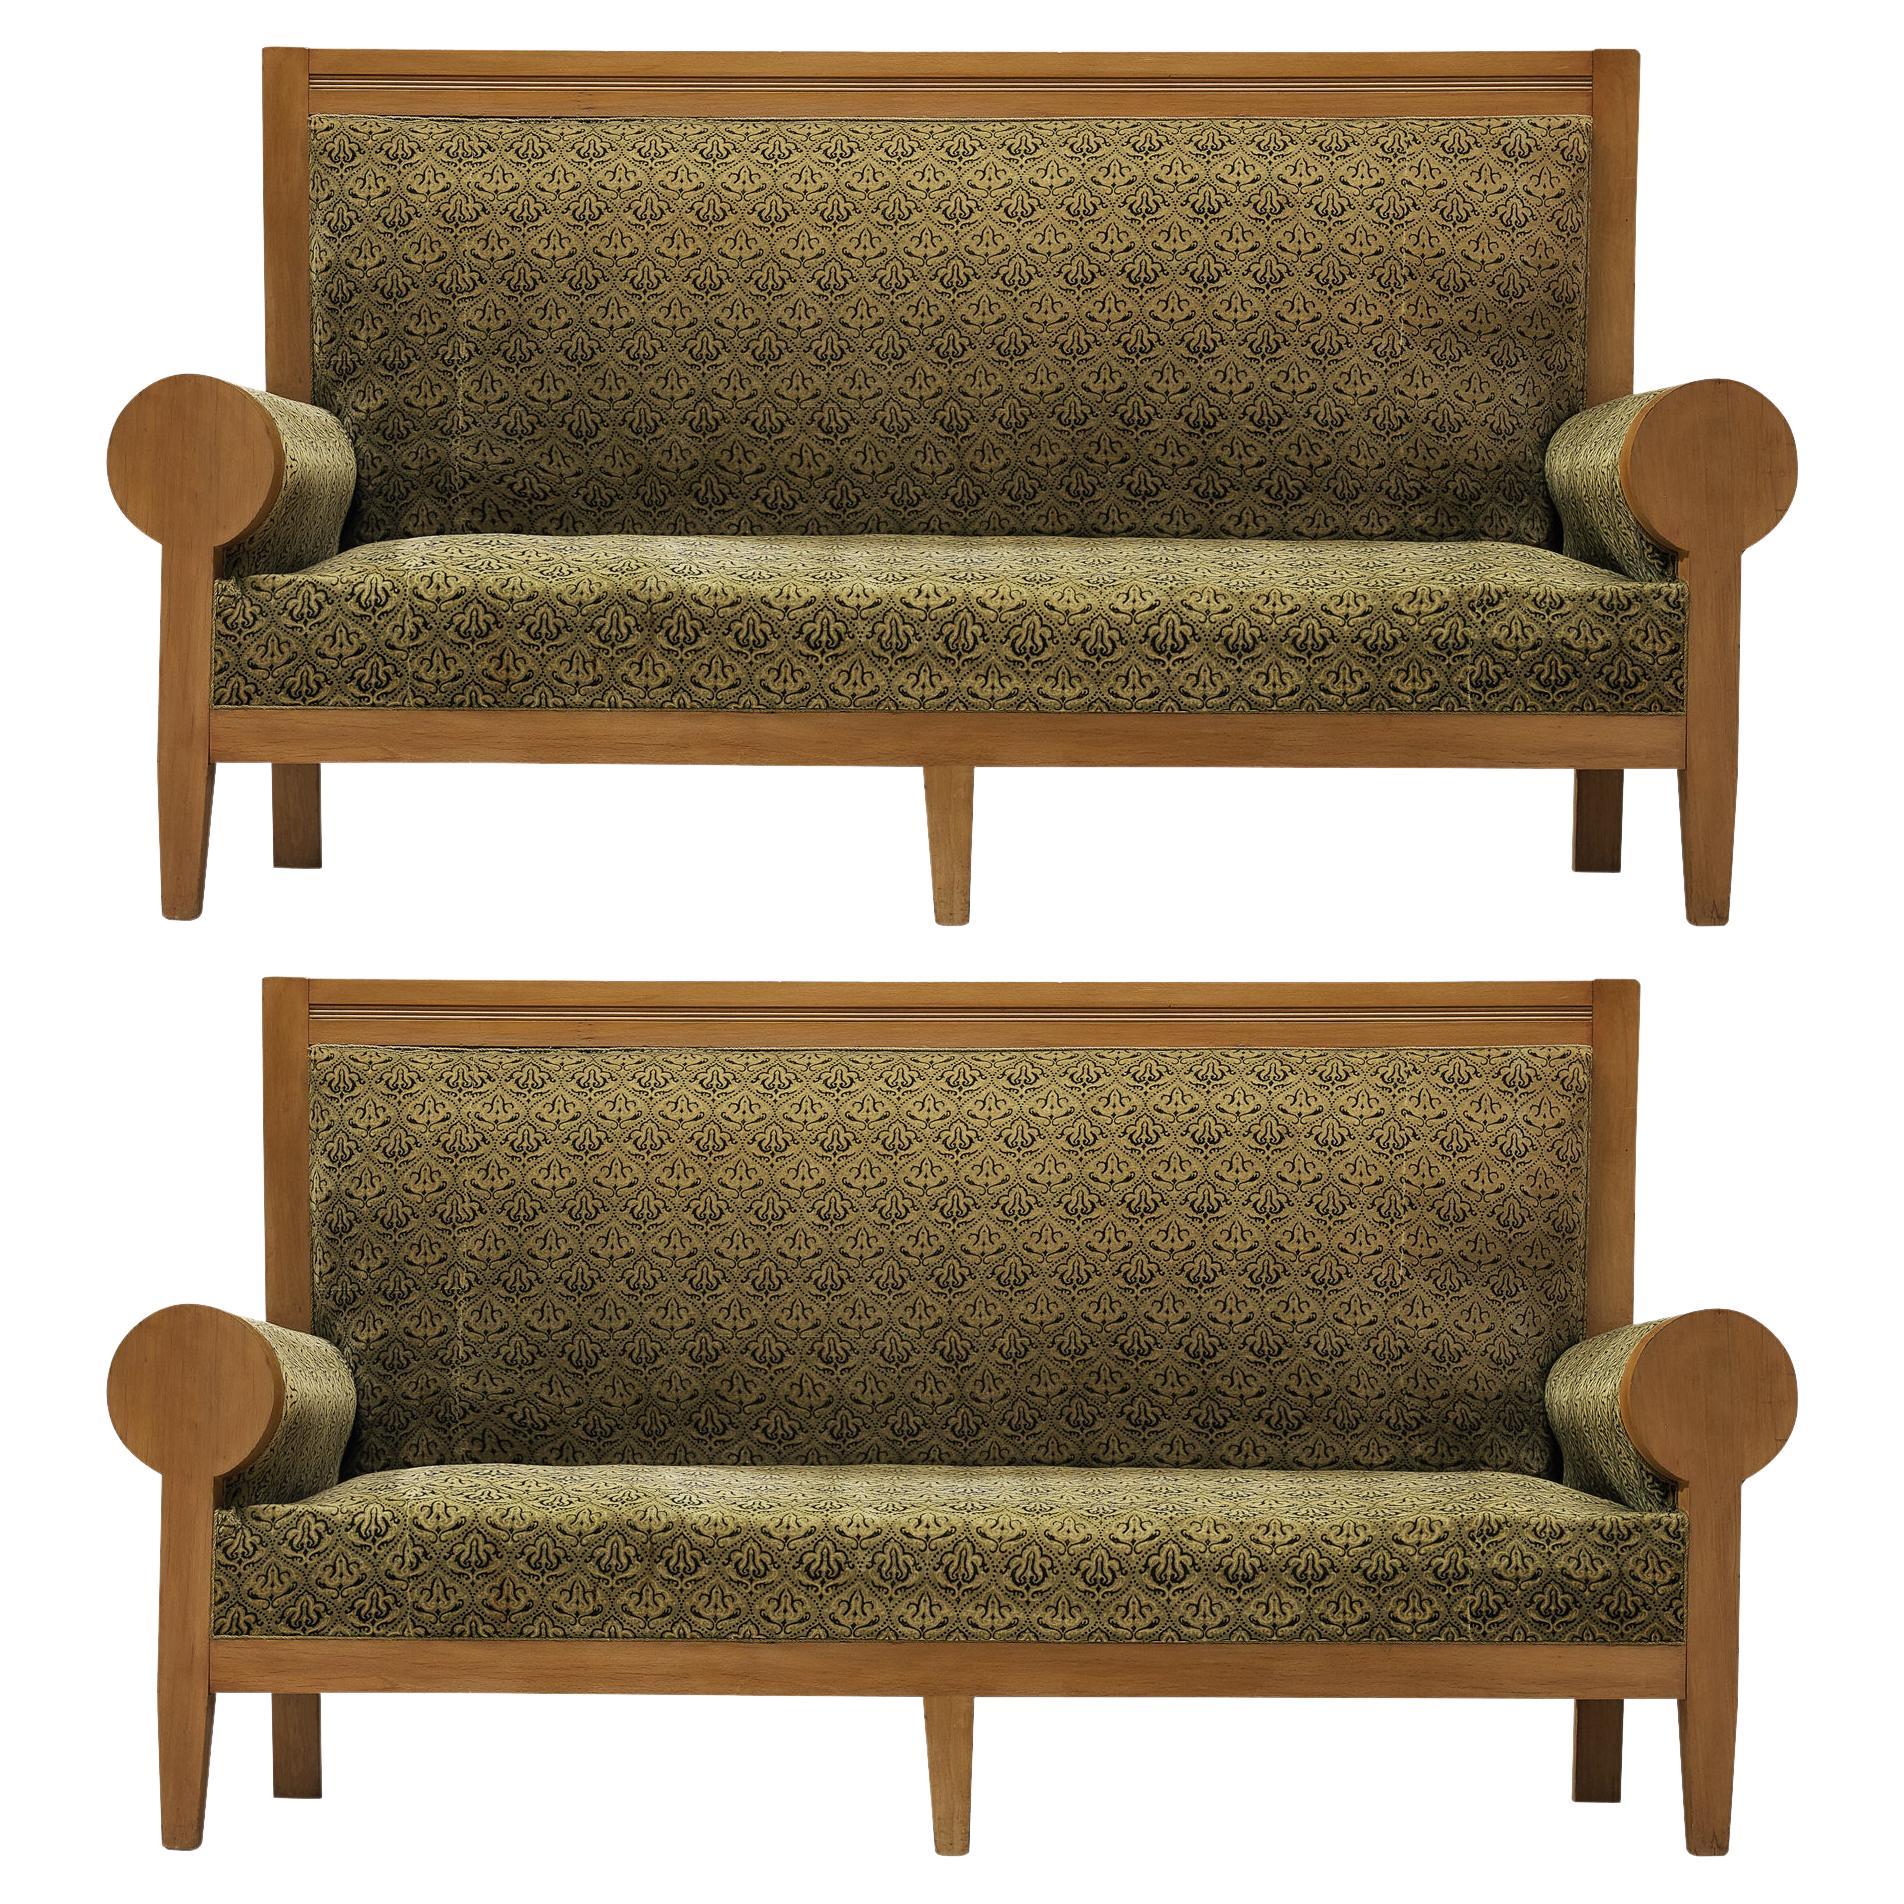 High Back Art Deco Sofas in Green Fabric Upholstery